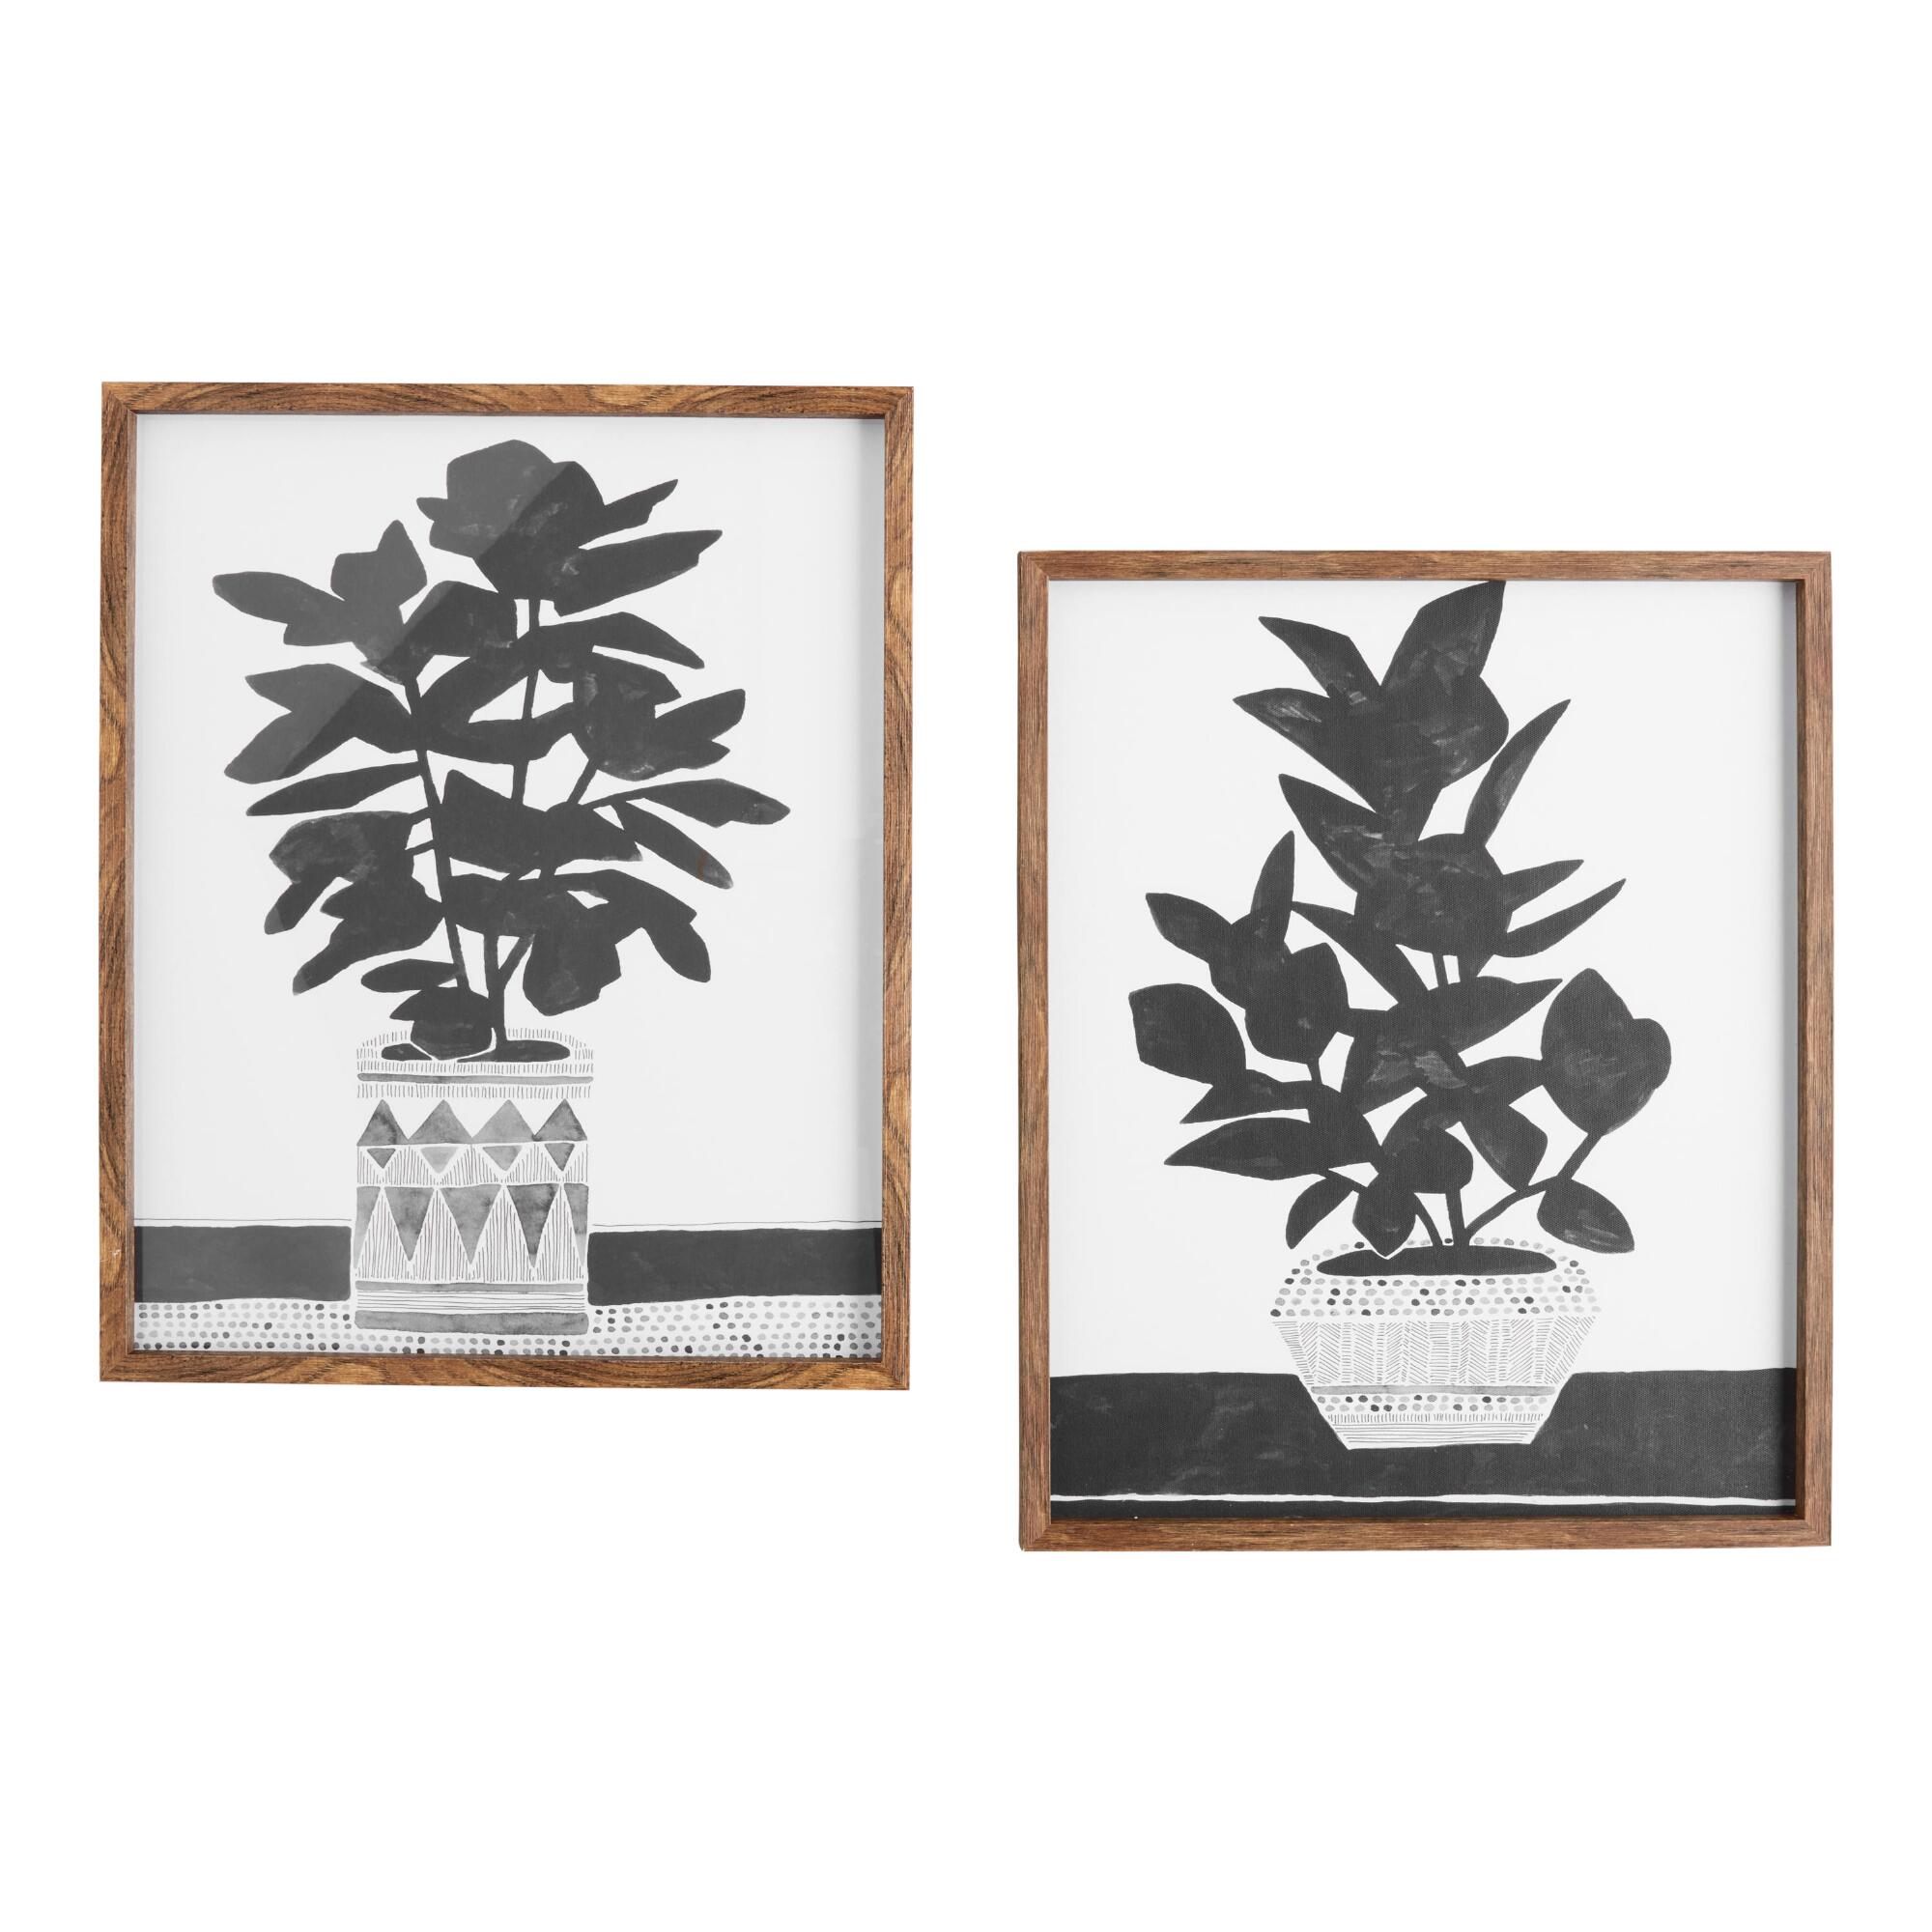 Namsos Planted By Kristine Hegre Framed Wall Art Set Of 2 by World Market